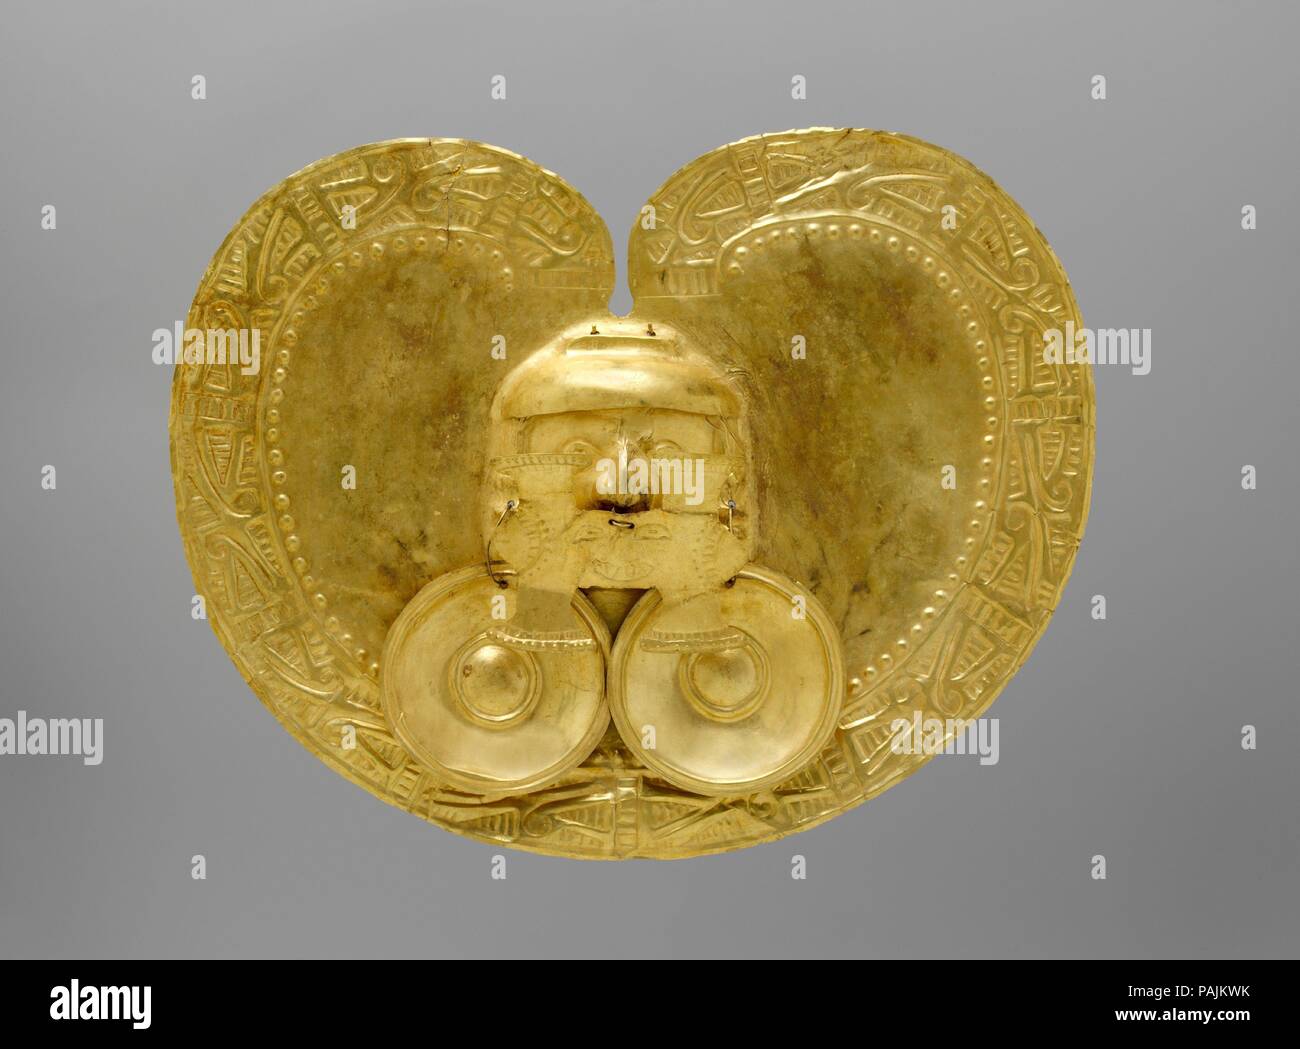 Pectoral with Face. Culture: Calima (Yotoco). Dimensions: H. 8 3/4 x W. 11 x D. 1 3/8 in. (22.2 x 27.9 x 3.5 cm). Date: 1st-7th century.  A large H-shaped nose pendant almost entirely obscures the face at the center of this gold, kidney-shaped pectoral. Both the shape of the pectoral and the form of the nose pendant are hallmarks of Yotoco-period Calima art. The Yotoco period was the second of three societies--Ilama, Yotoco-Malagana, and Sonso--to successively occupy the Cauca Valley region in west-central Colombia. The three societies are known collectively as the Calima culture.   The upper  Stock Photo